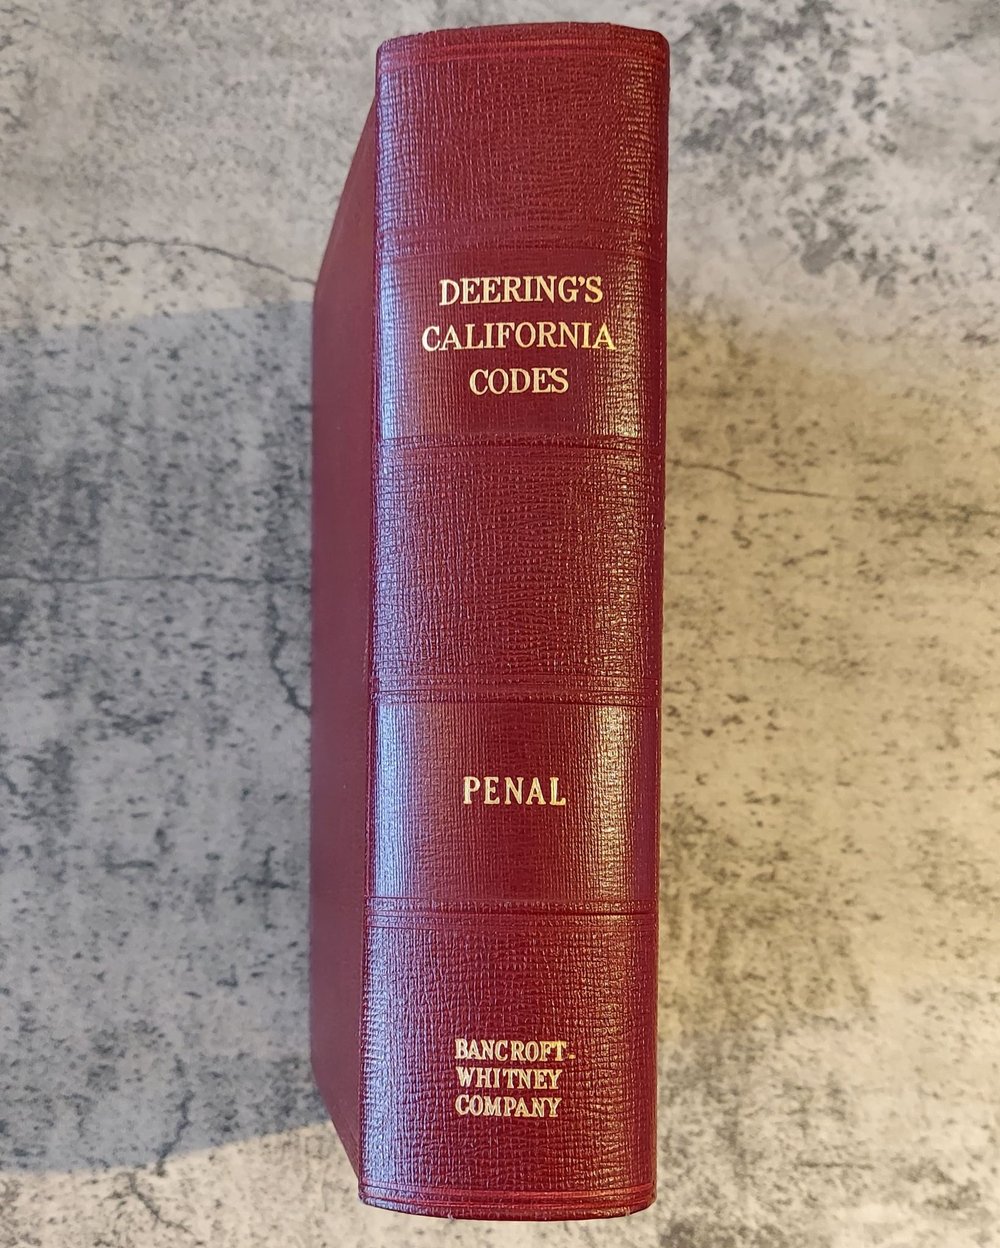 Deering’s Penal Code of the State of California - 1959